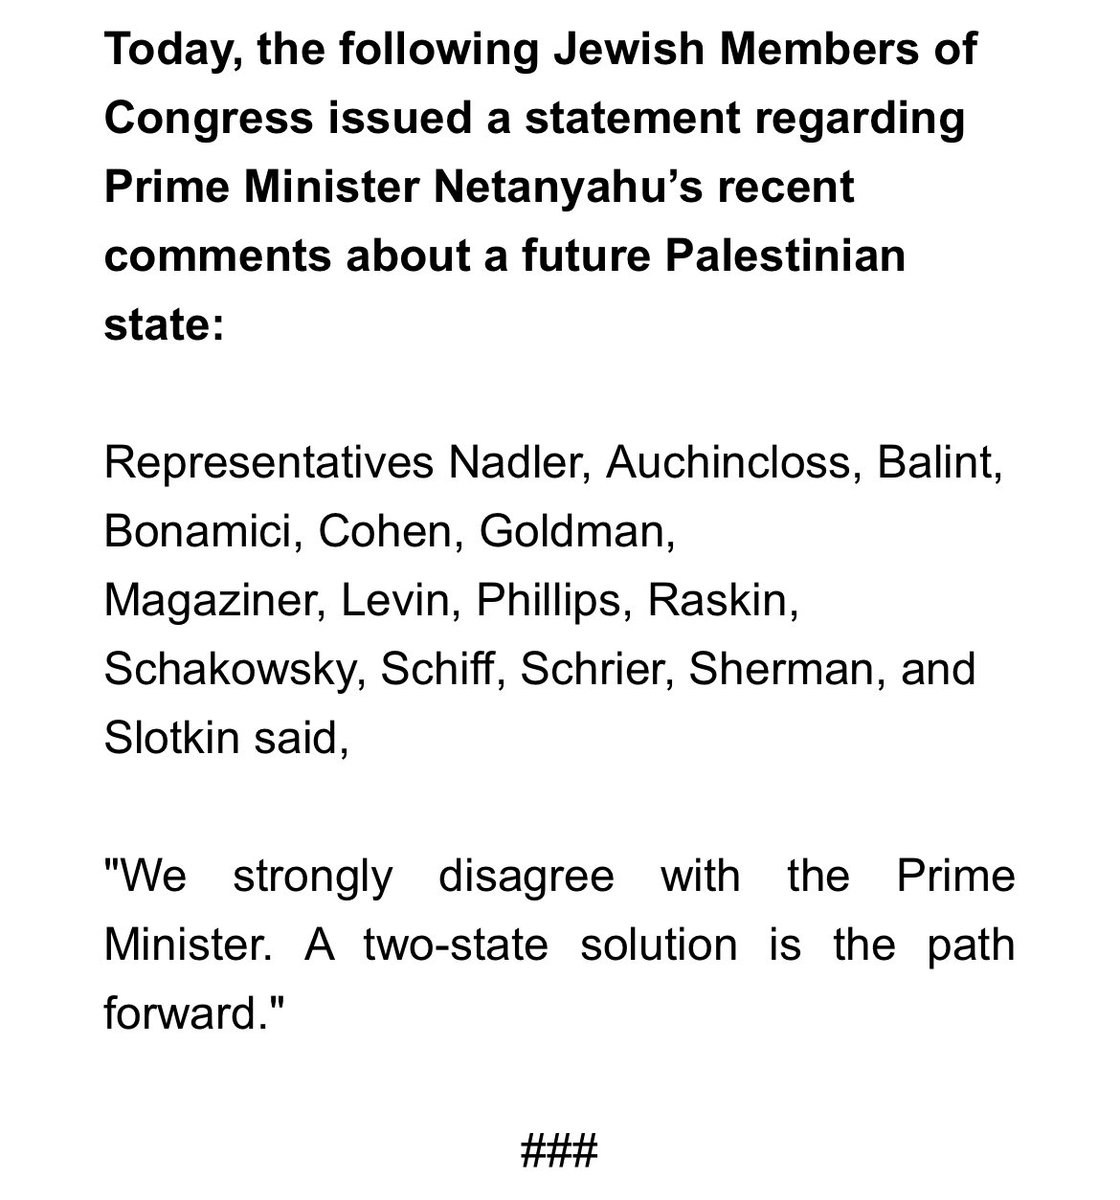 Jewish Dems say they disagree with Netanyahu’s comments opposing a Palestinian state: “We strongly disagree with the Prime Minister. A two-state solution is the path forward.'